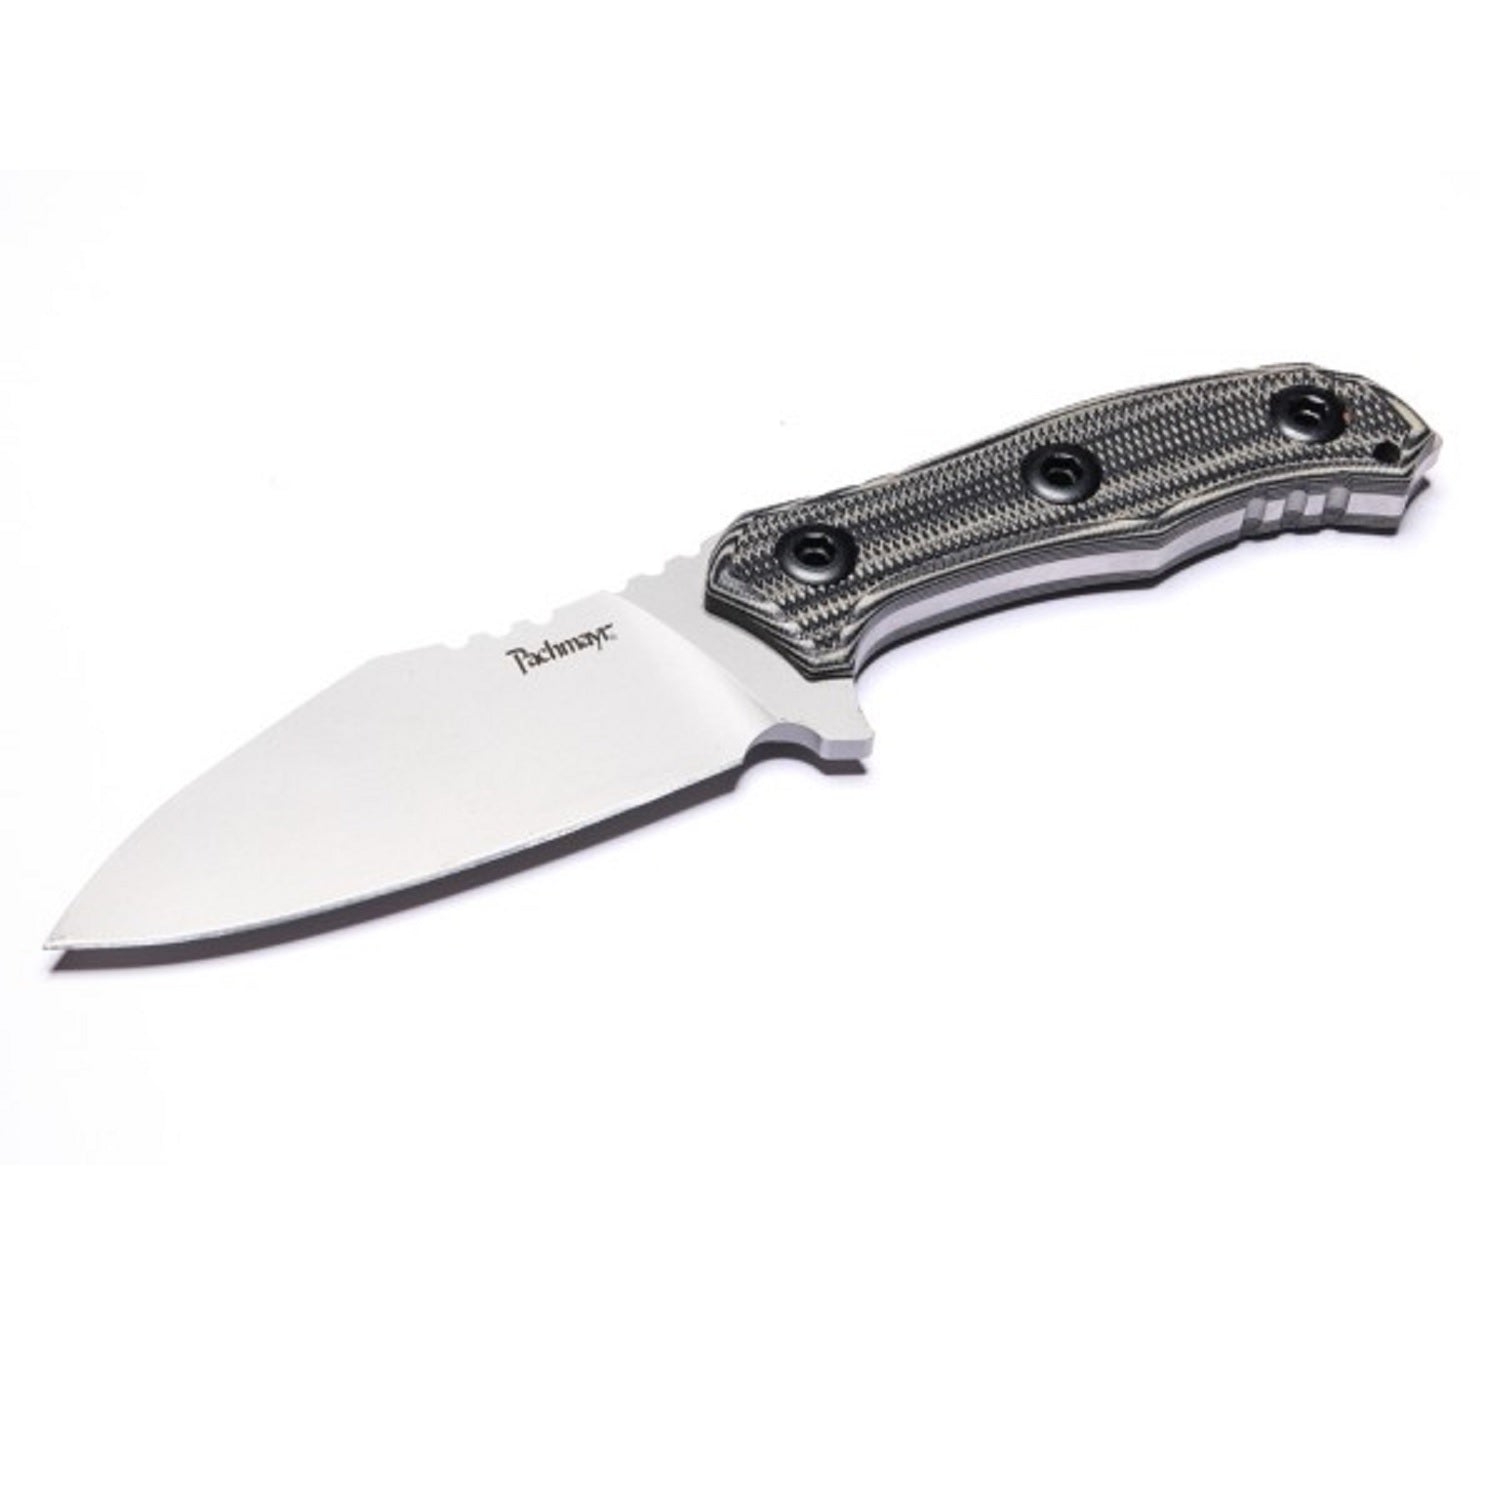 Pachmayr Dominator Fixed 4.75 in Blade G-10 Handle.